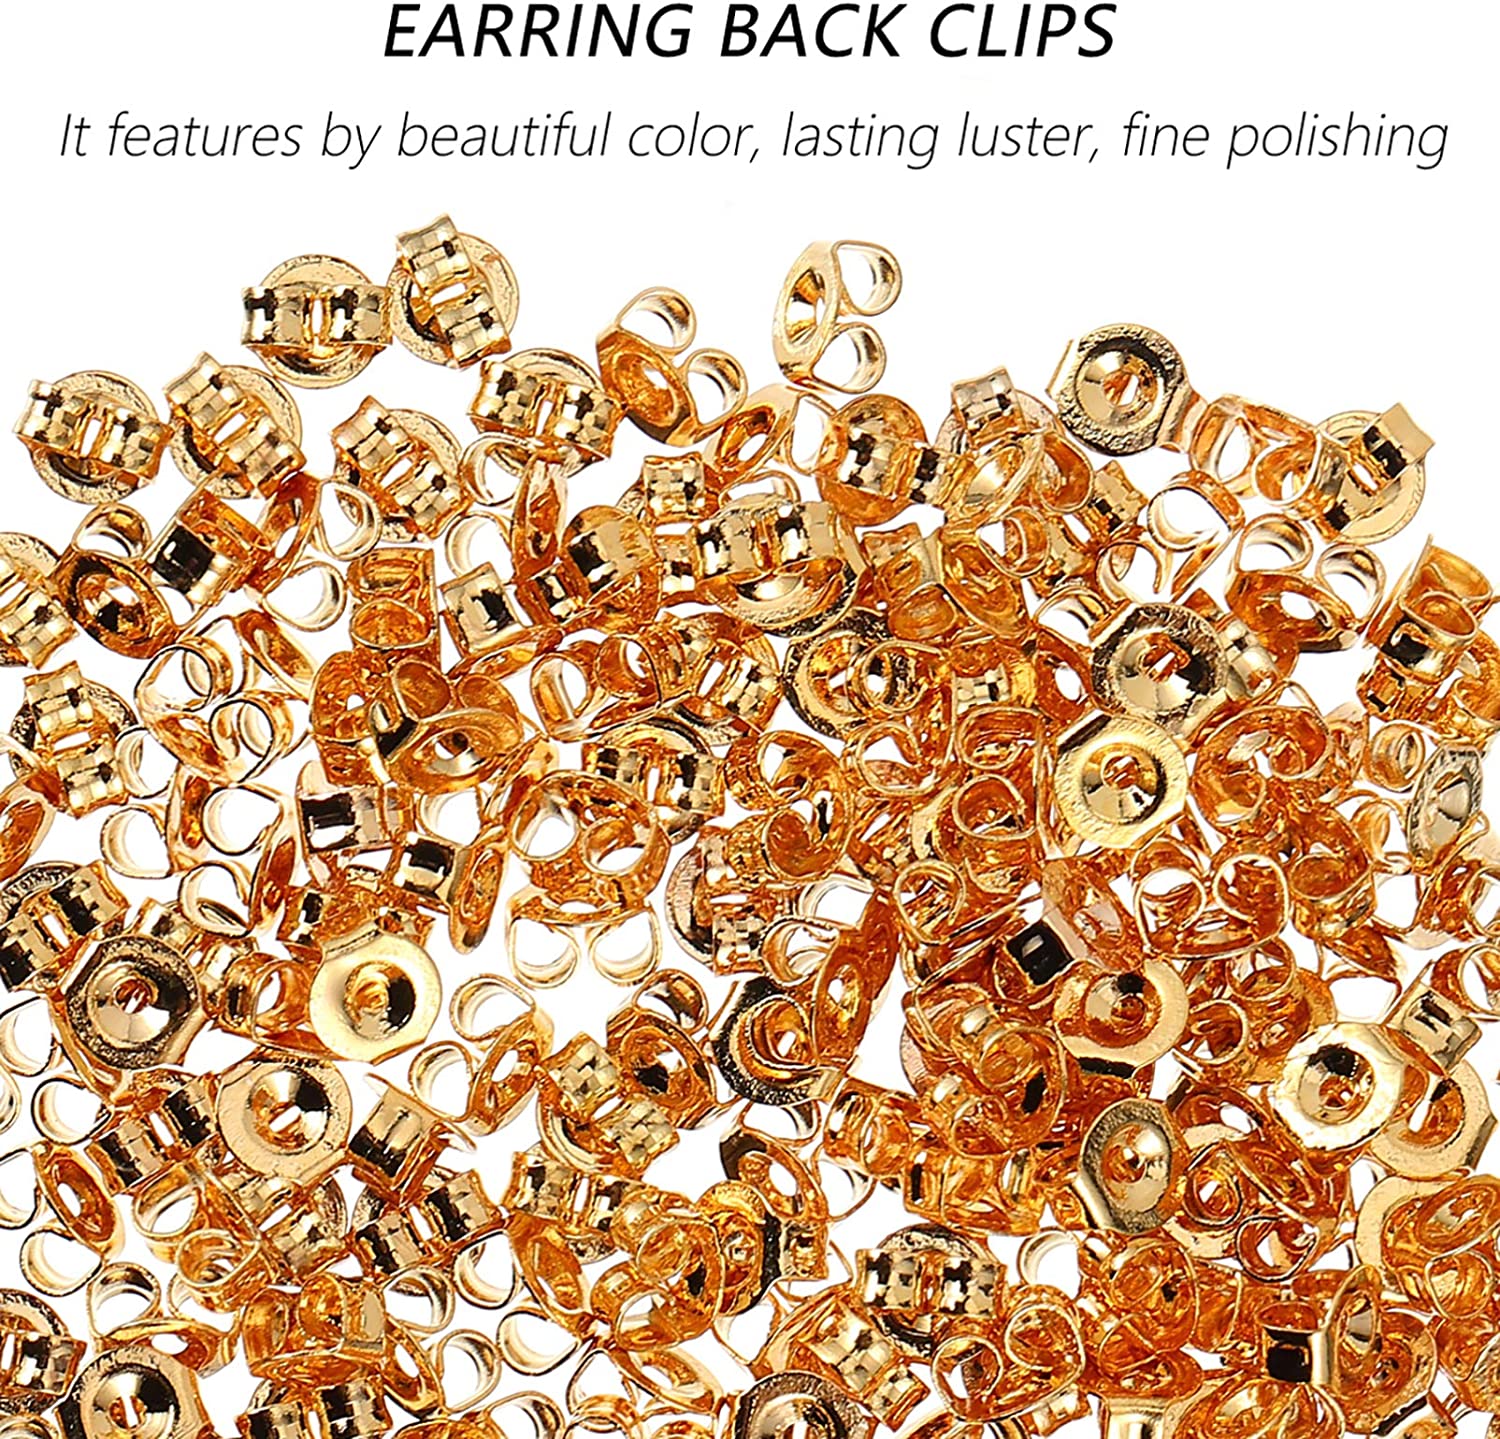 200pcs Sterling Silver Earring Backs Yellow Replacement Earring Backs Replacement Secure Ear Lockings Hypoallergenic Secure Earring Backs for Women and Girls - image 3 of 5